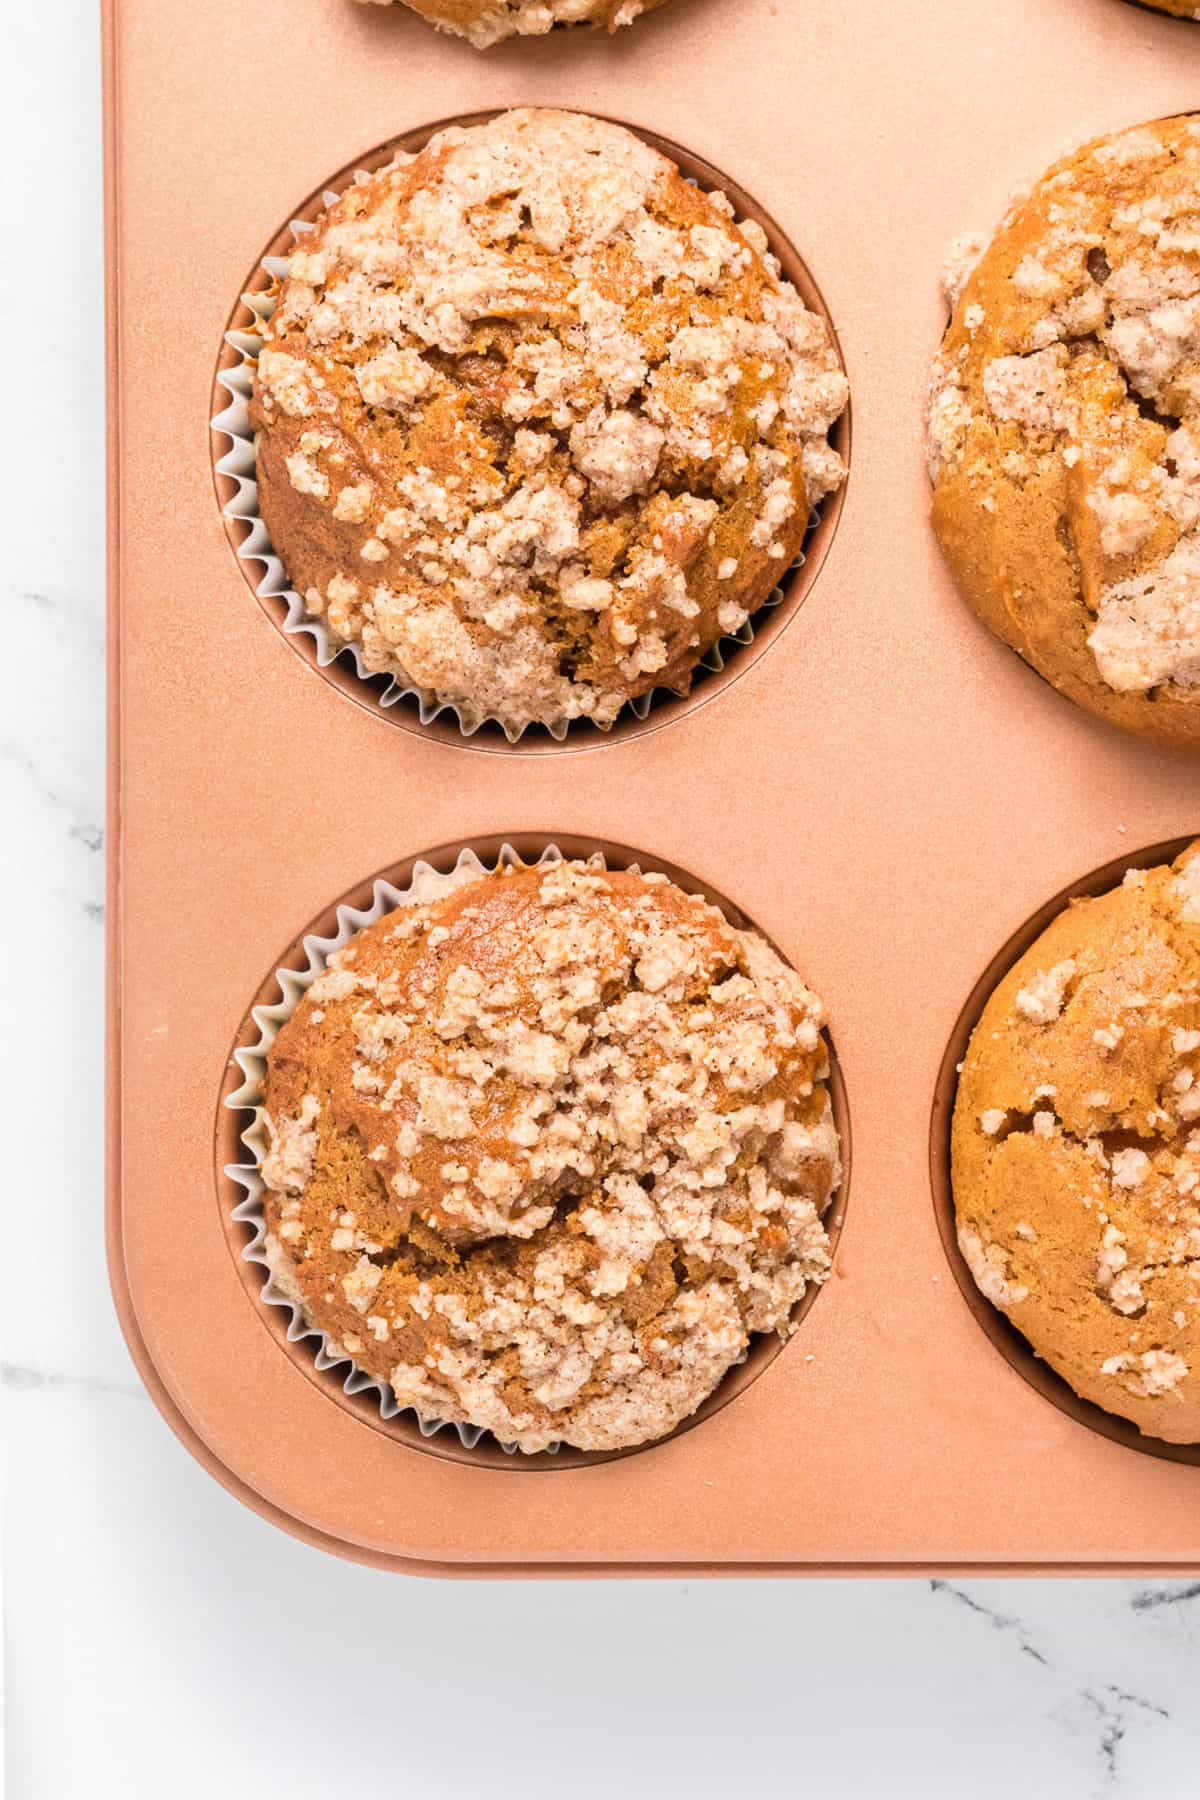 a close up image of a pumpkin muffin with streusel topping.